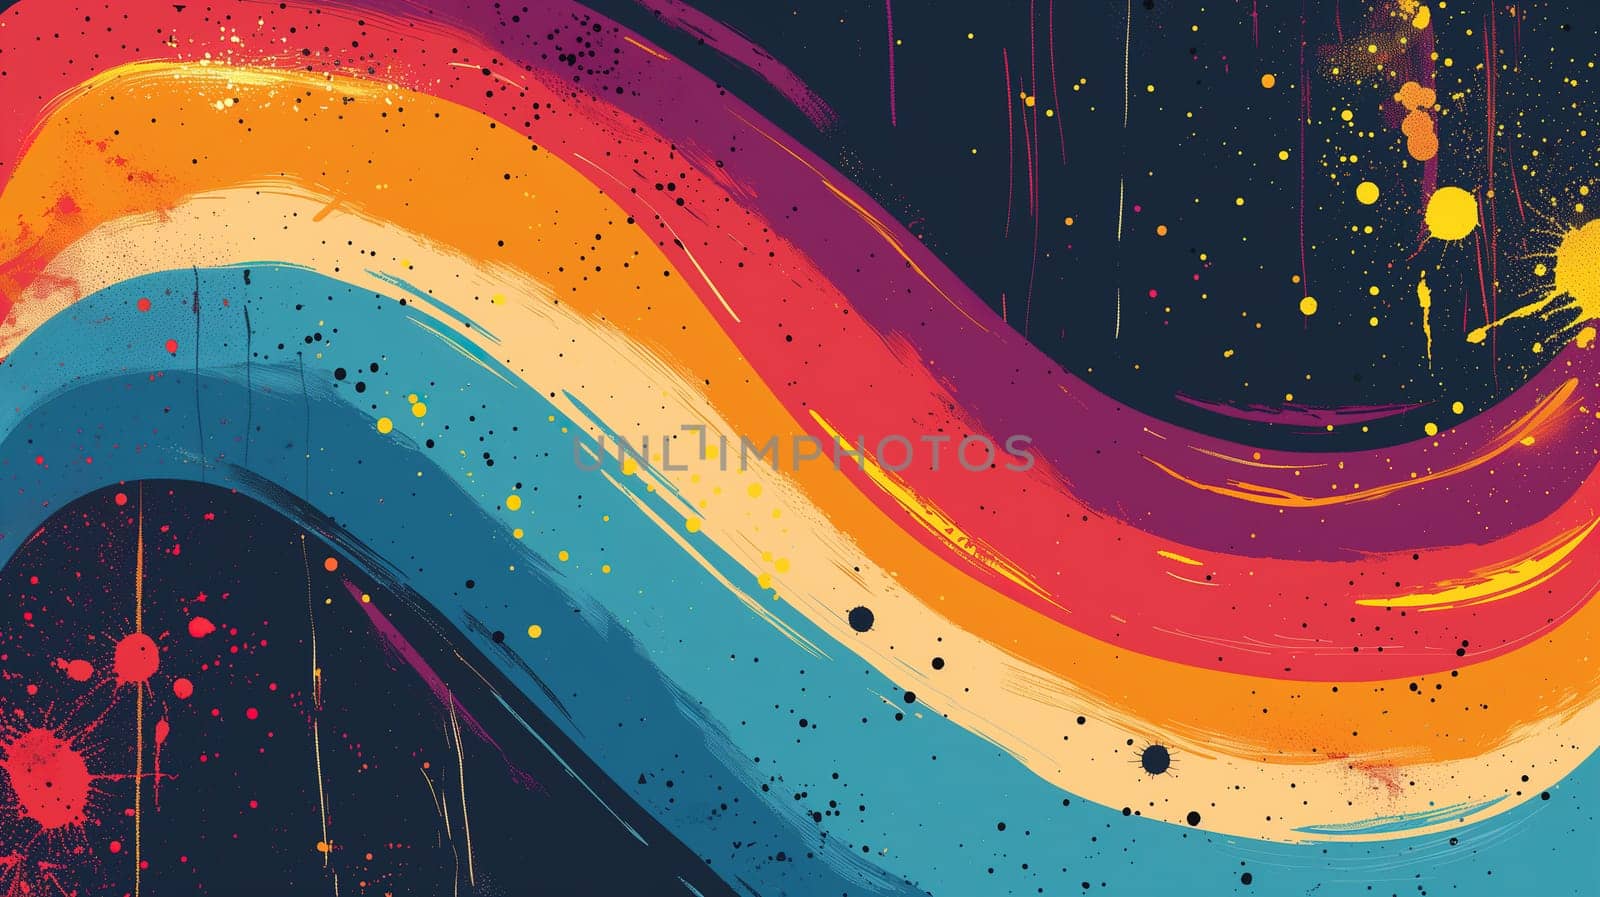 A vibrant multicolored wave rises dynamically against a stark black background in this striking painting. The waves colors blend and flow seamlessly, creating a visually captivating display that embodies the lgbt pride concept.